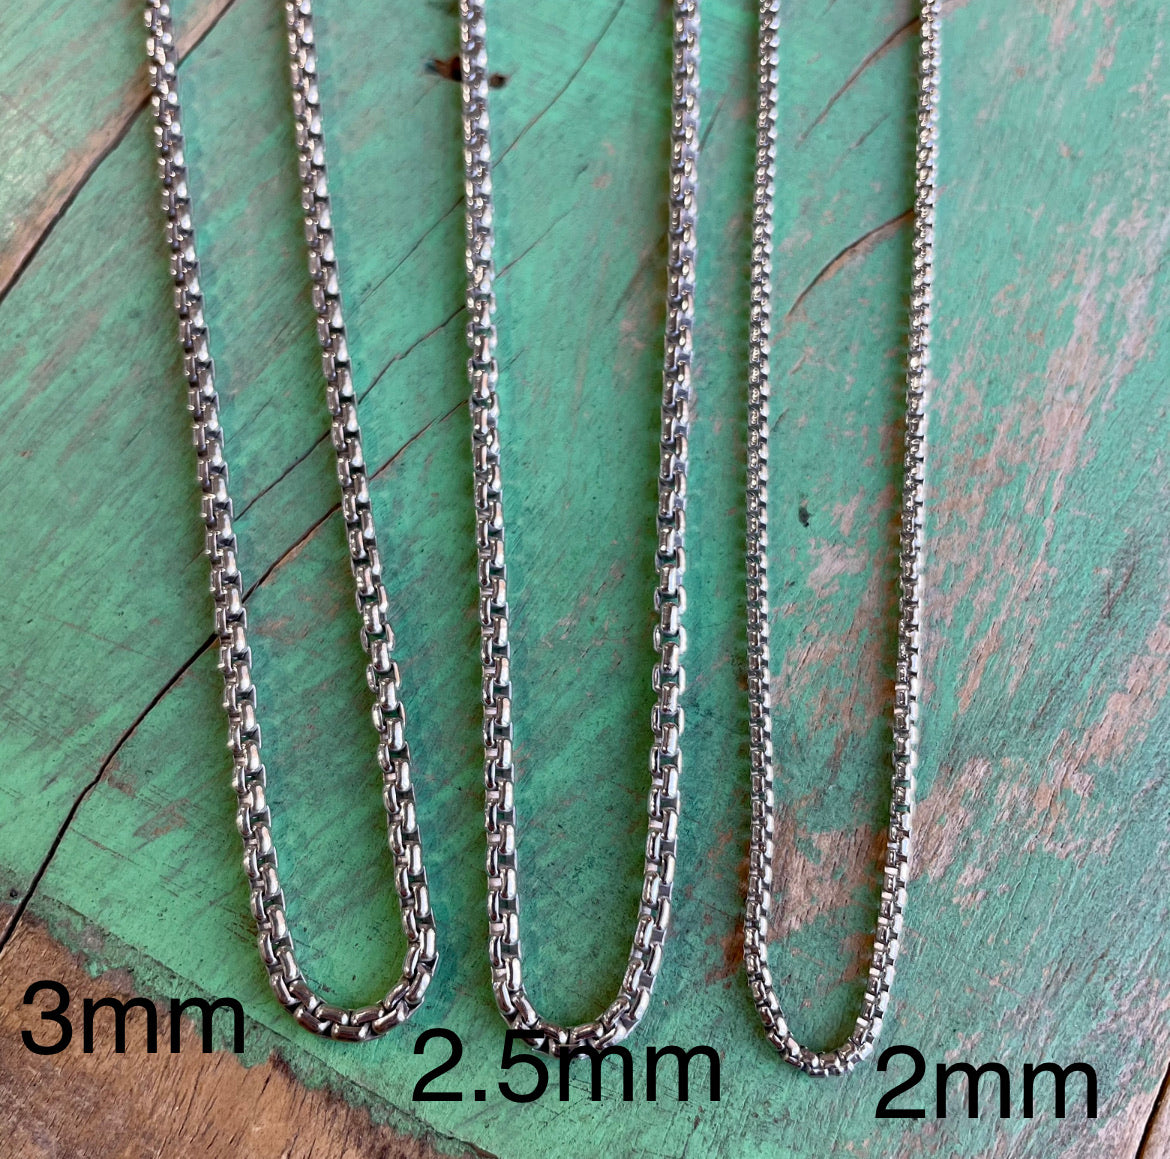 Sterling Silver 2mm Box Chain